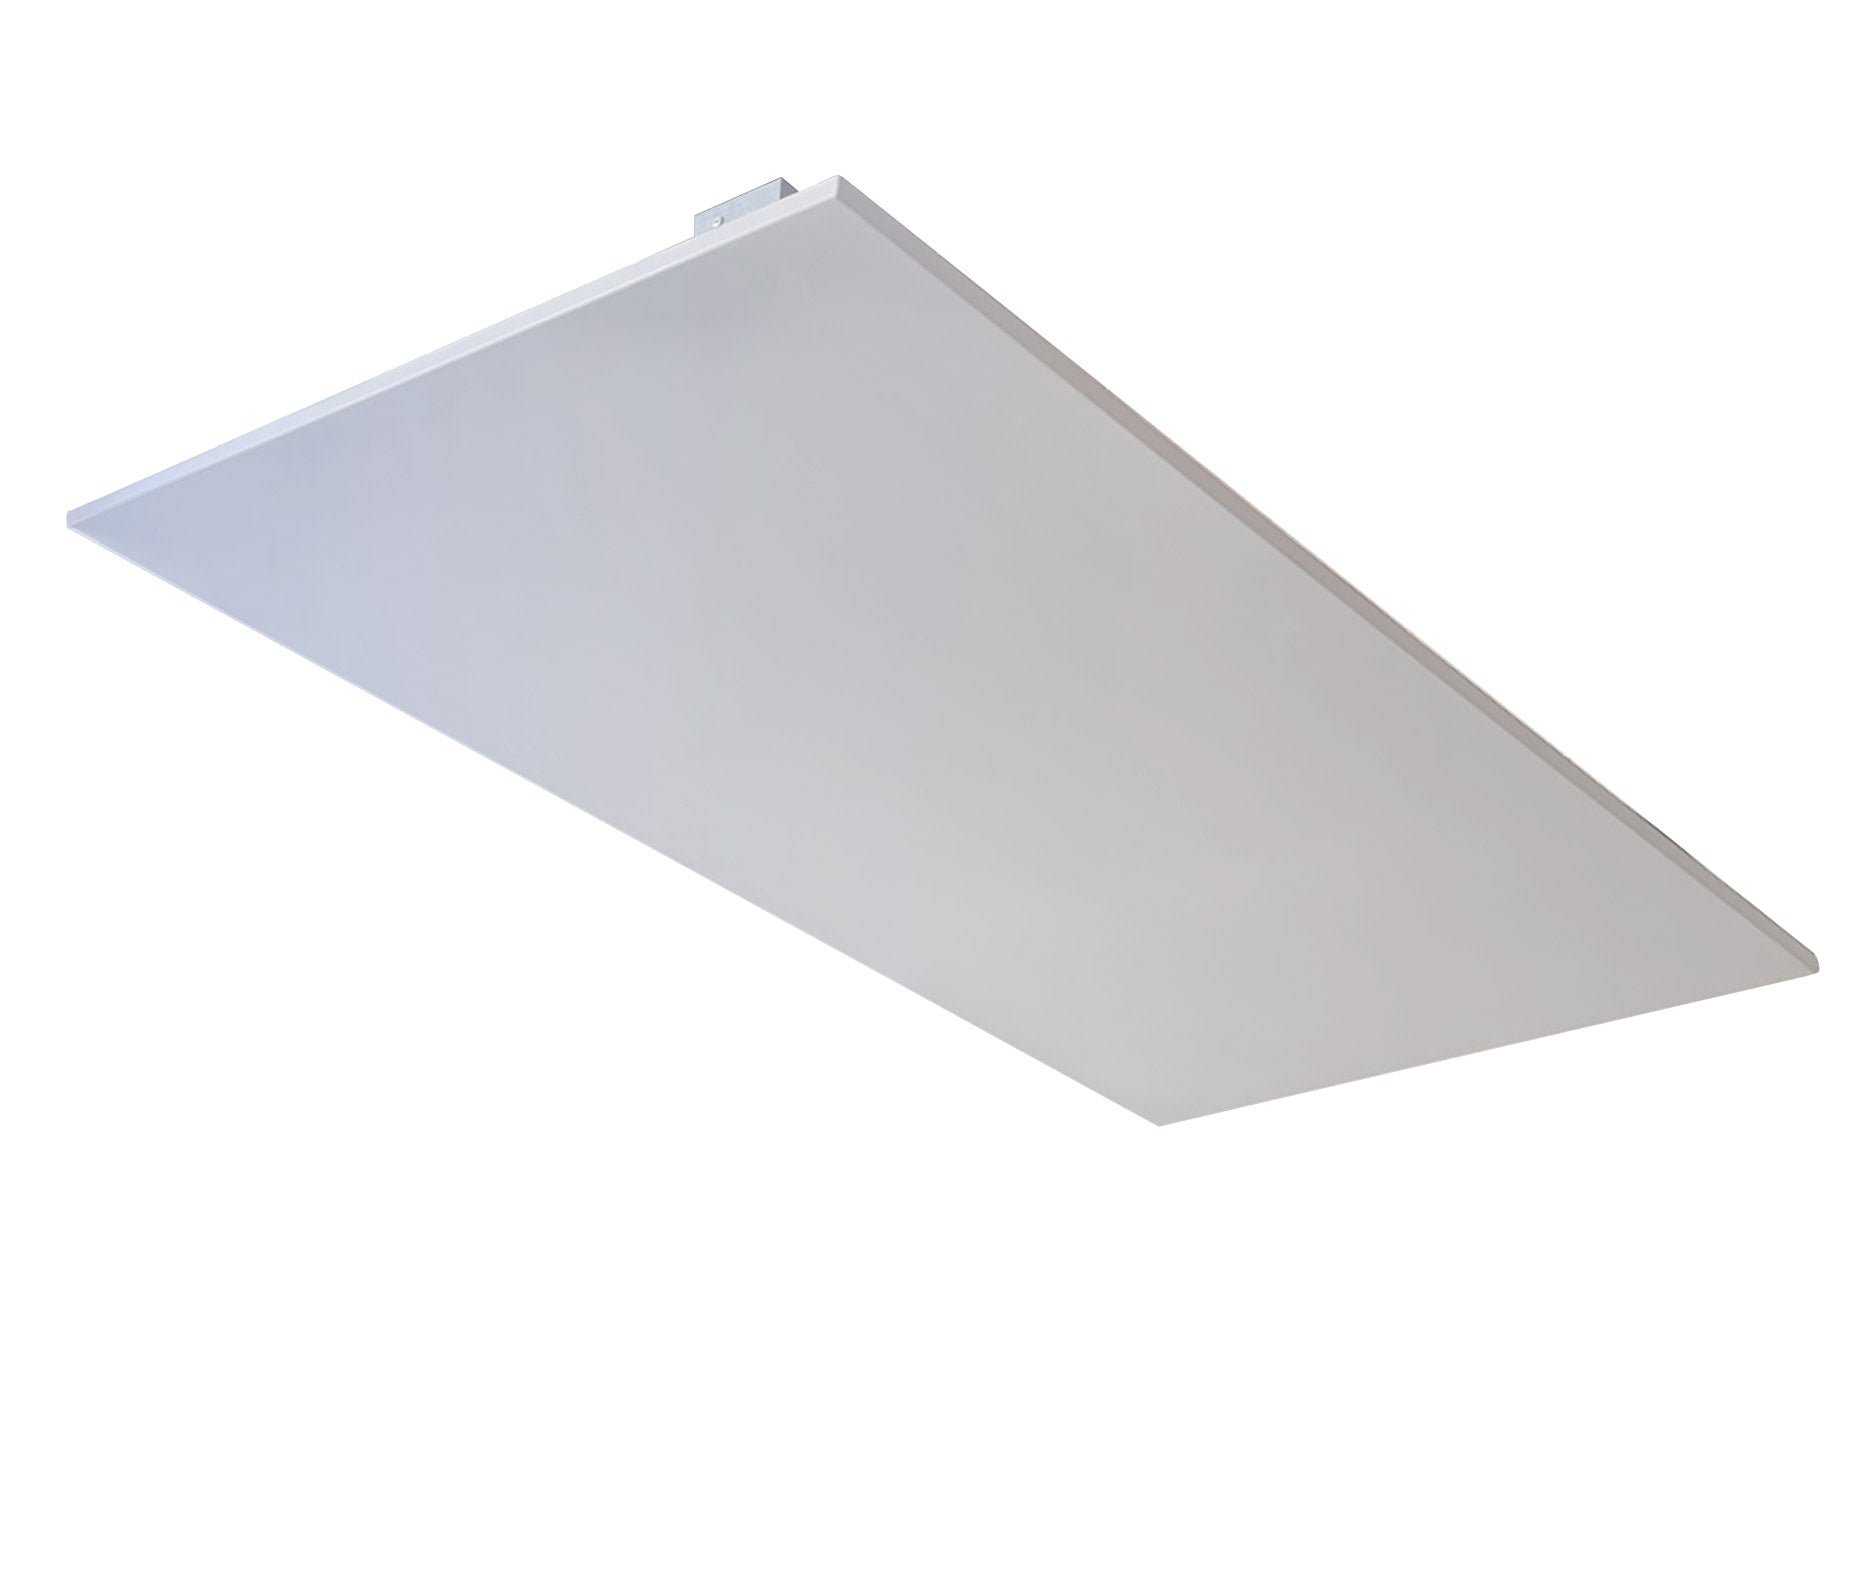 Far Infrared Heaters for Armstrong Suspended Ceiling Metal White "LOTUS RANGE" 400-800 Watts